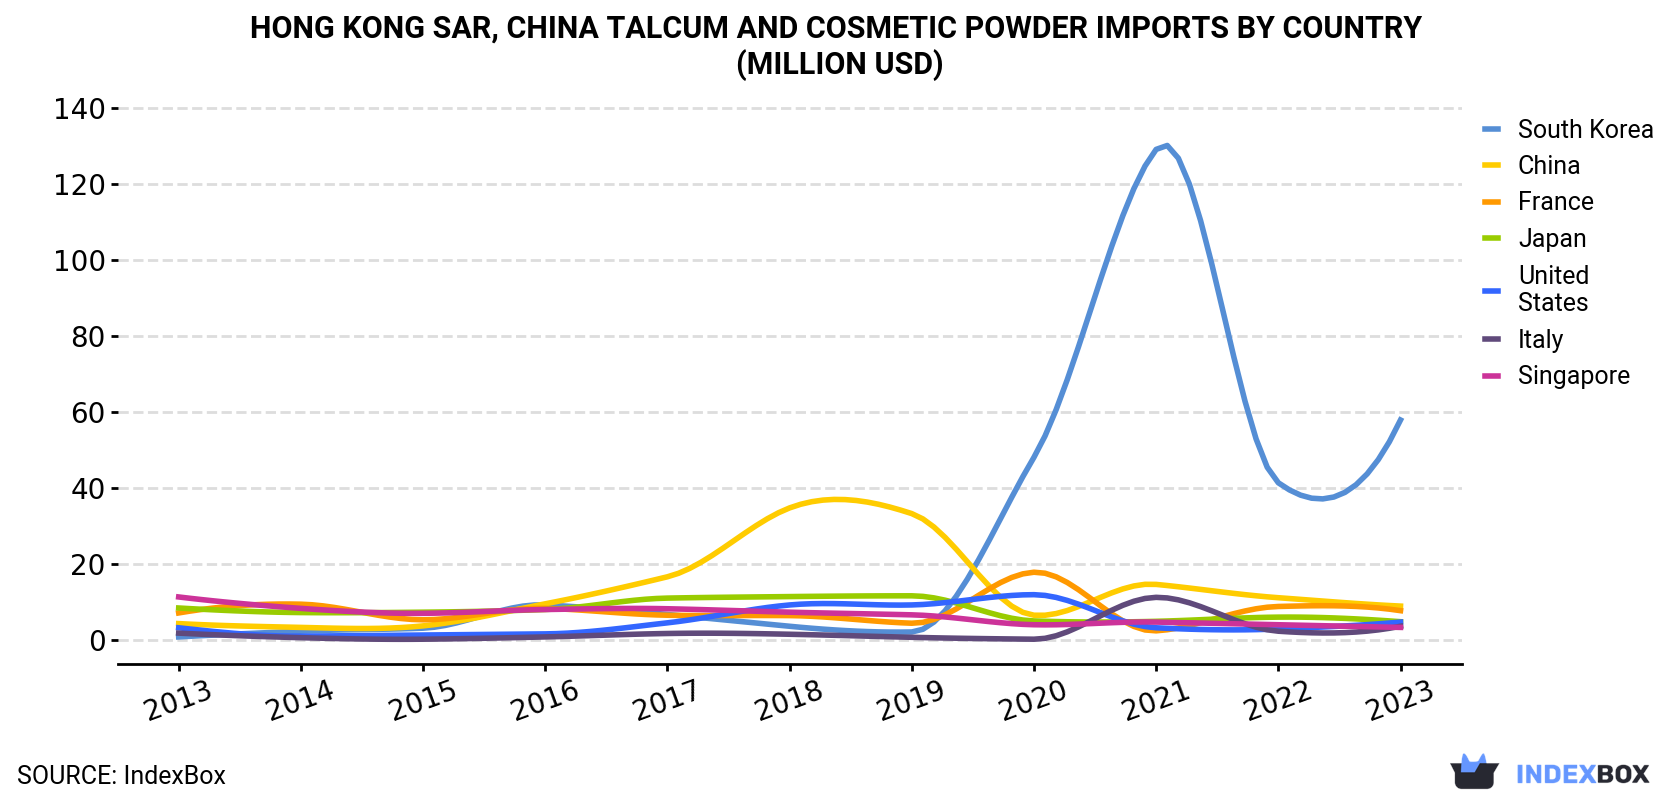 Hong Kong Talcum and Cosmetic Powder Imports By Country (Million USD)